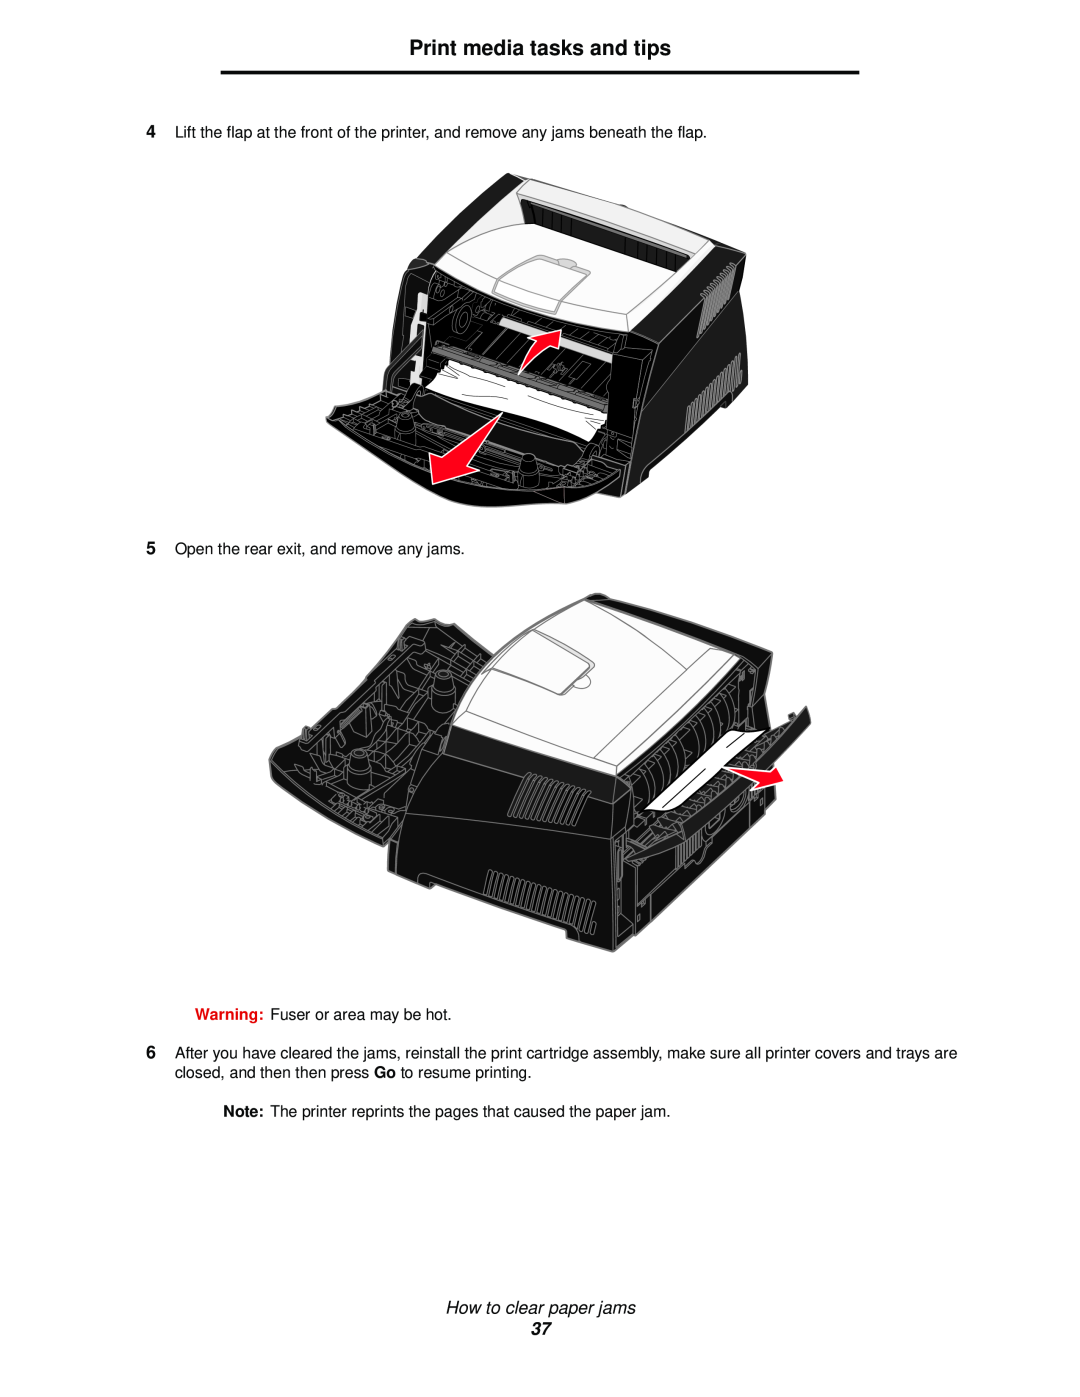 Lexmark 340, 342n manual Print media tasks and tips, How to clear paper jams 